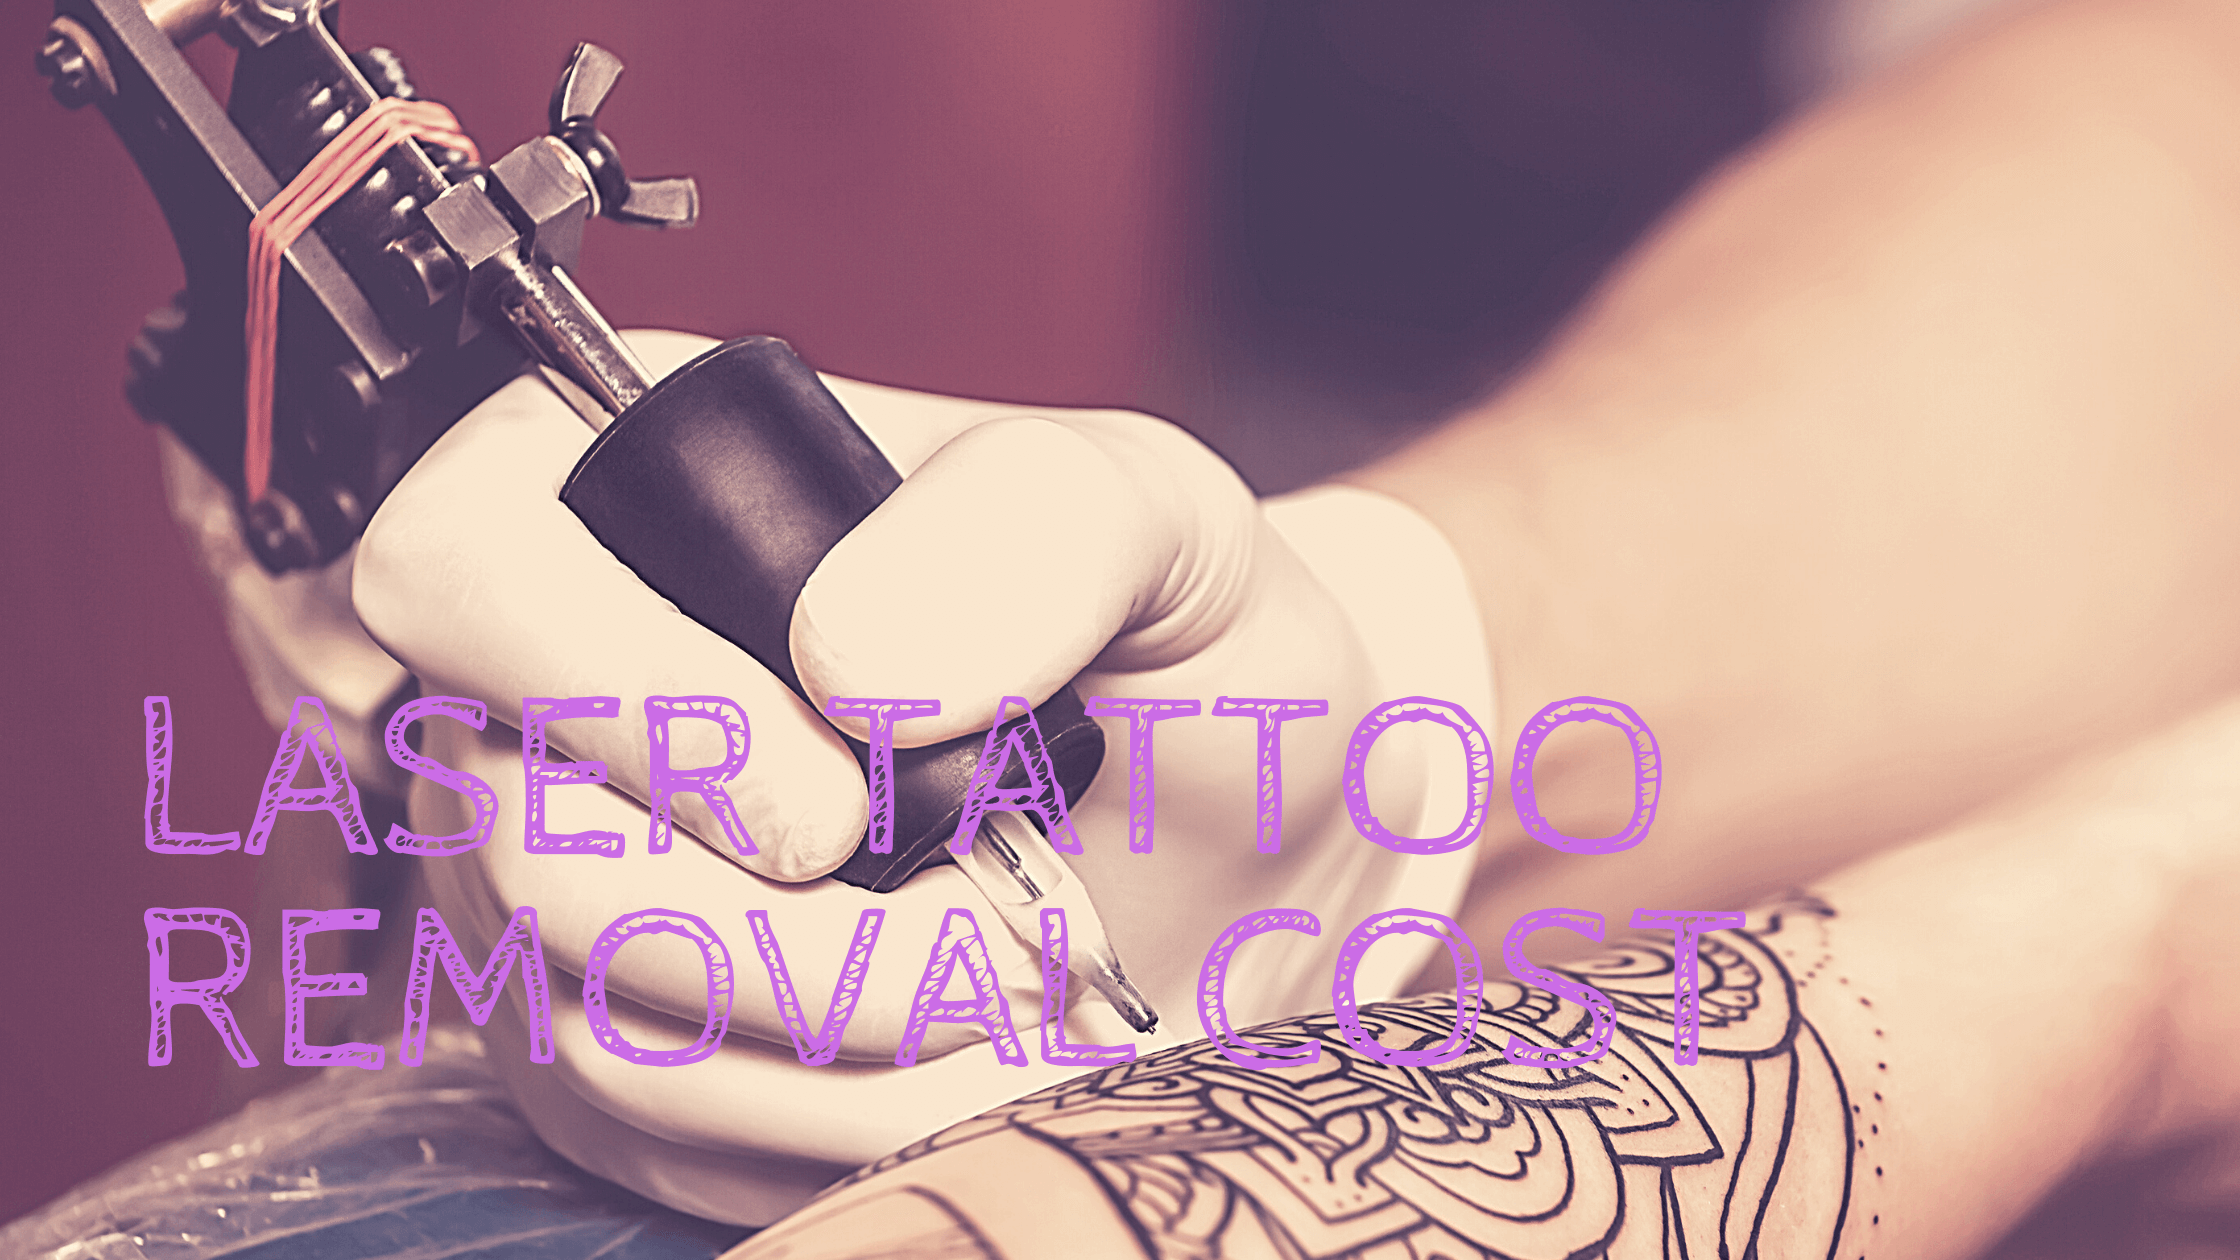 Laser Tattoo Removal Cost